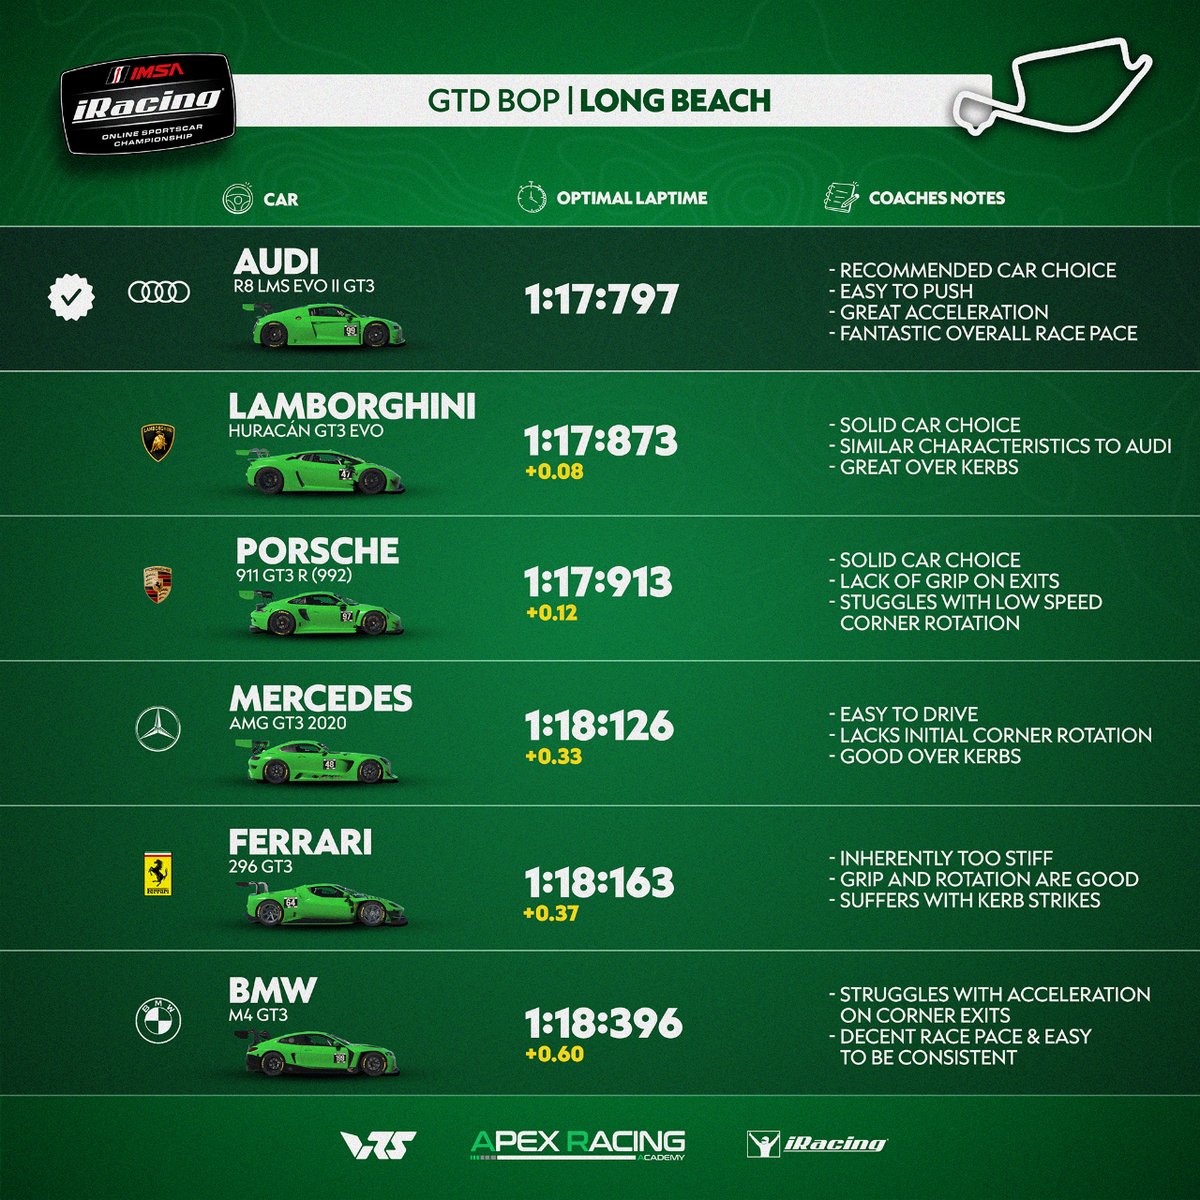 Multiclass madness on the streets of Long Beach! 🏖️ Results from BoP testing as IMSA iRacing Series heads stateside for Week 6️⃣! ⏰ GTD -Sunday, 12:00 GMT ⏰ GTP -Monday, 15:00 GMT 📺 twitch.tv/apexracingteam #apexracingacademy #iracing